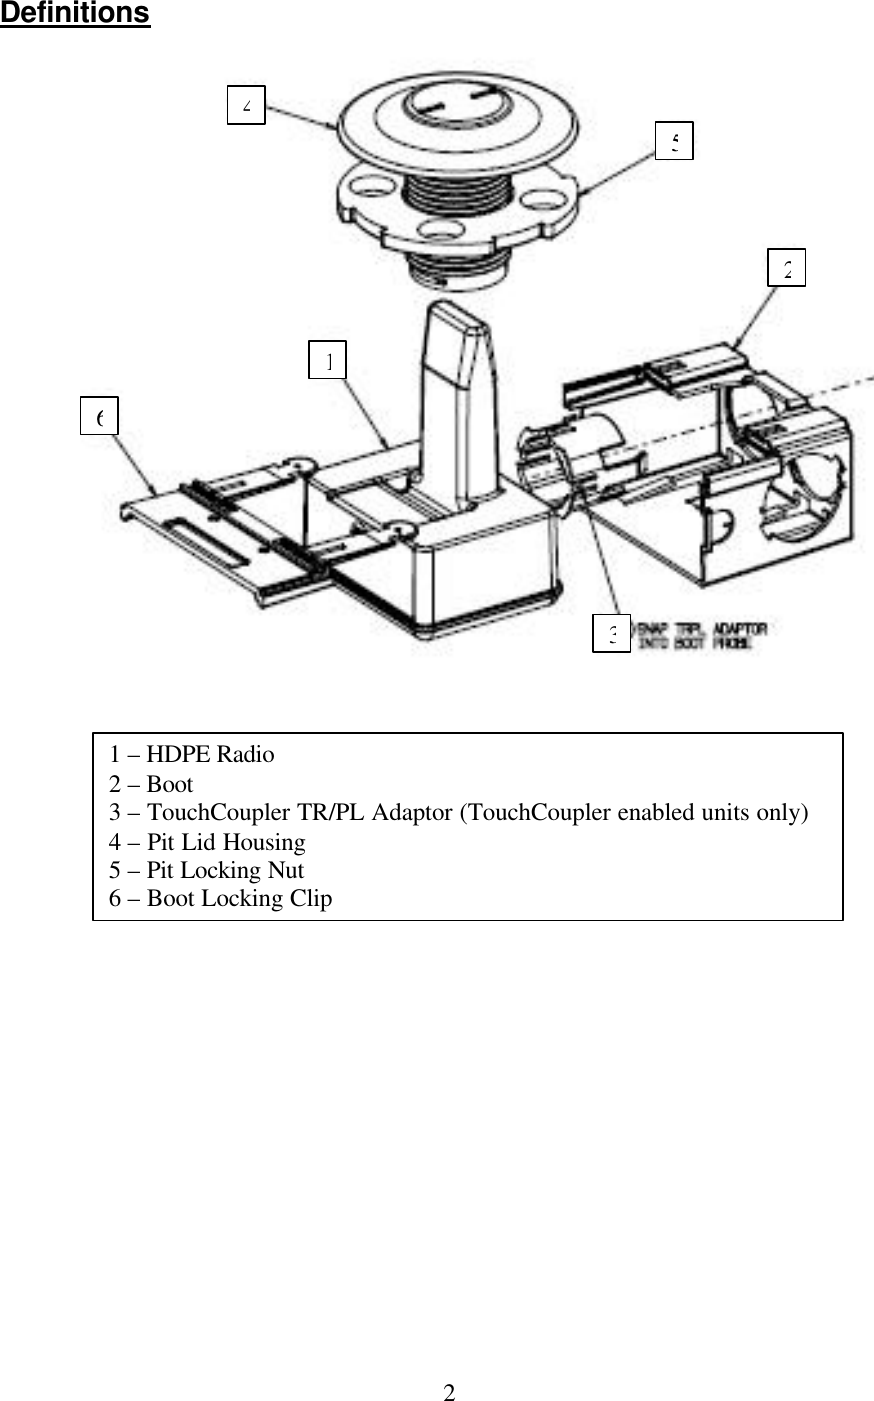  2Definitions         1 – HDPE Radio 2 – Boot 3 – TouchCoupler TR/PL Adaptor (TouchCoupler enabled units only) 4 – Pit Lid Housing 5 – Pit Locking Nut 6 – Boot Locking Clip 451263